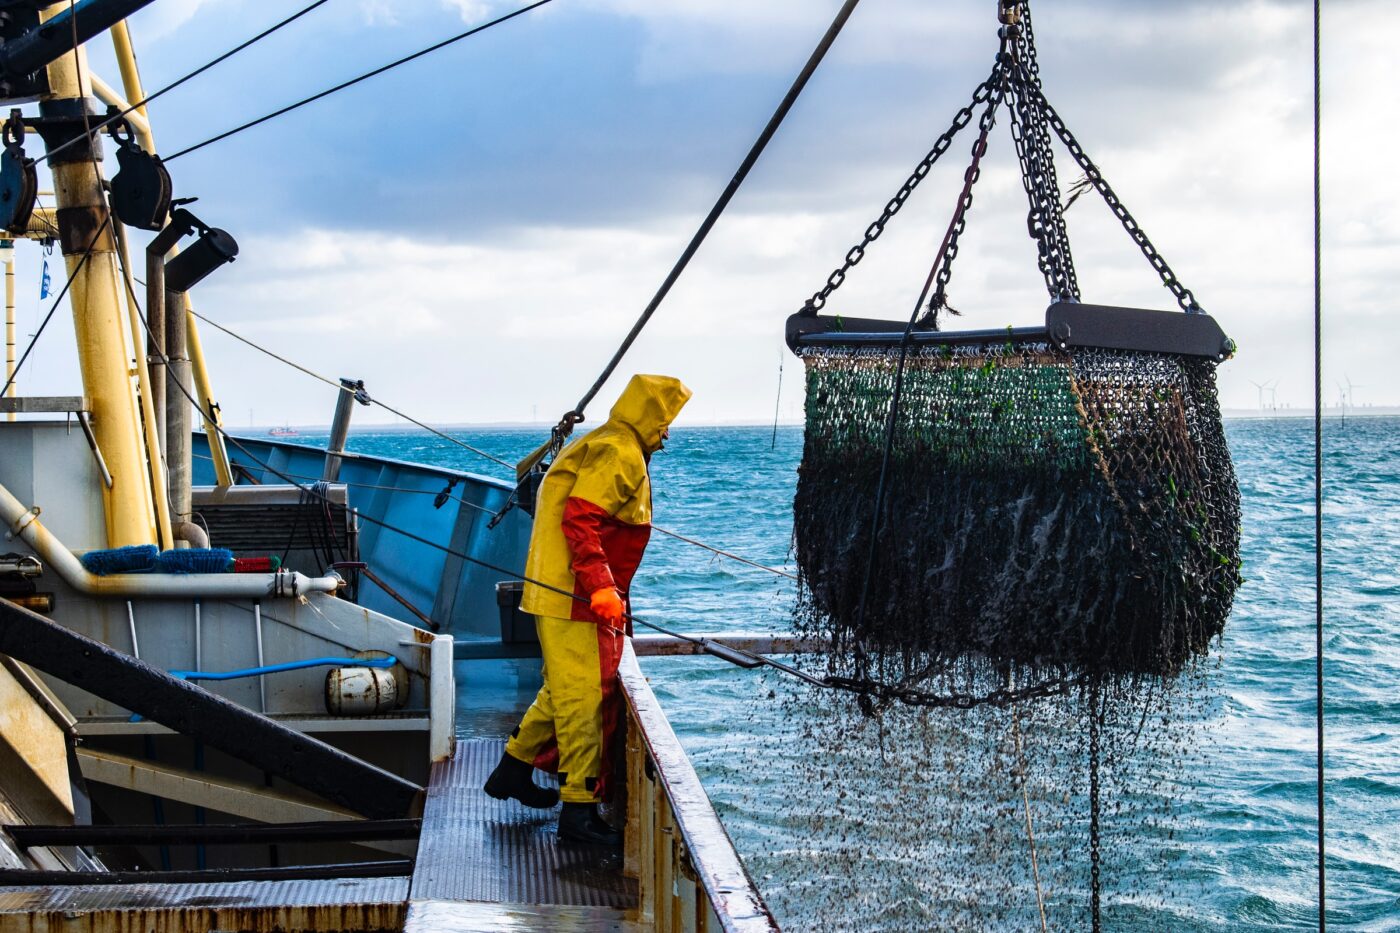 fisherman looking at fish in net being hauled up